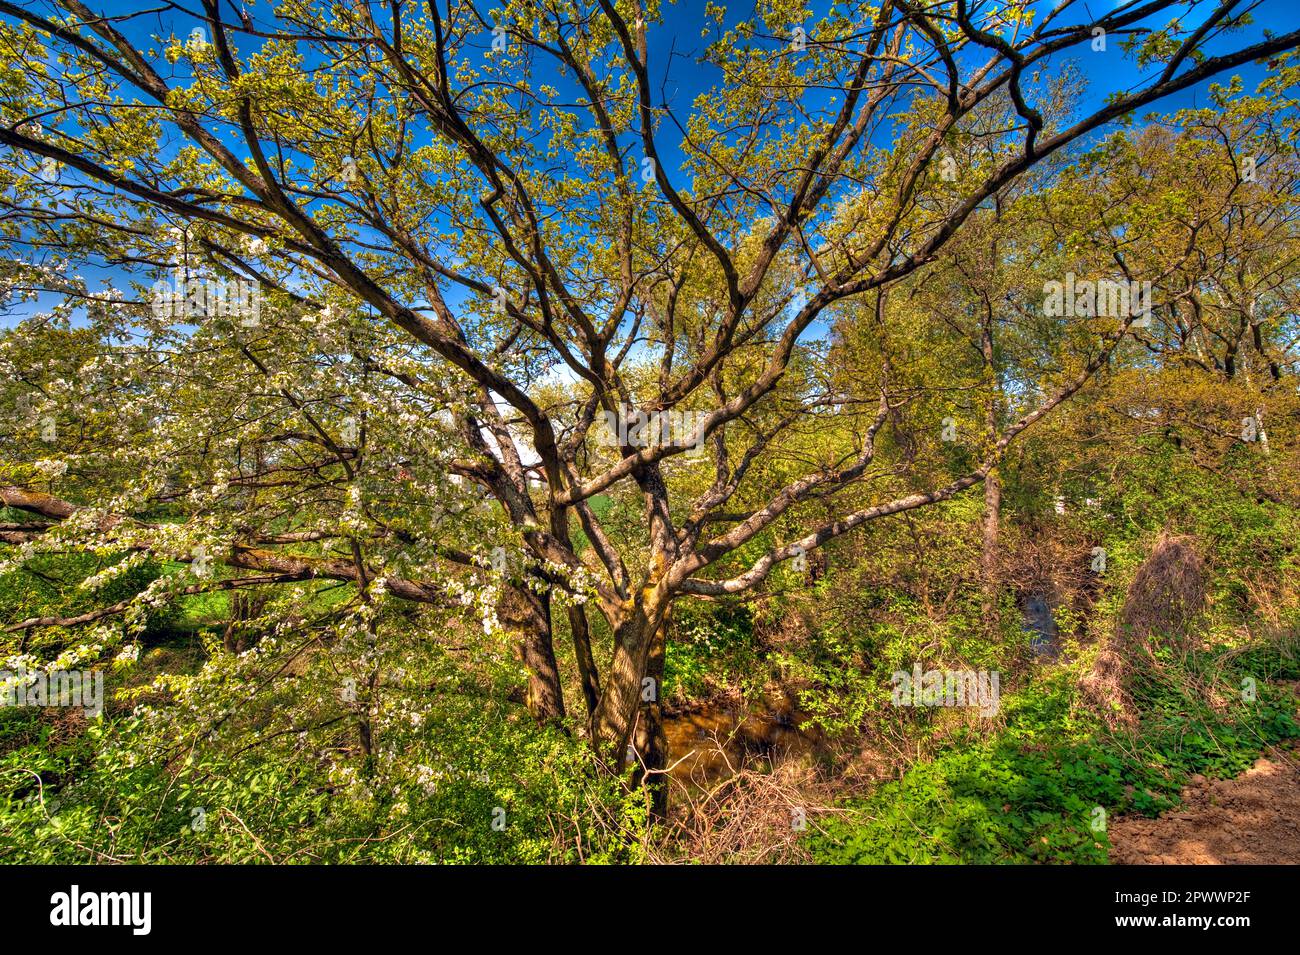 A flowering deciduous tree in spring with thicket and undergrowth under a blue sky with fine weather Stock Photo